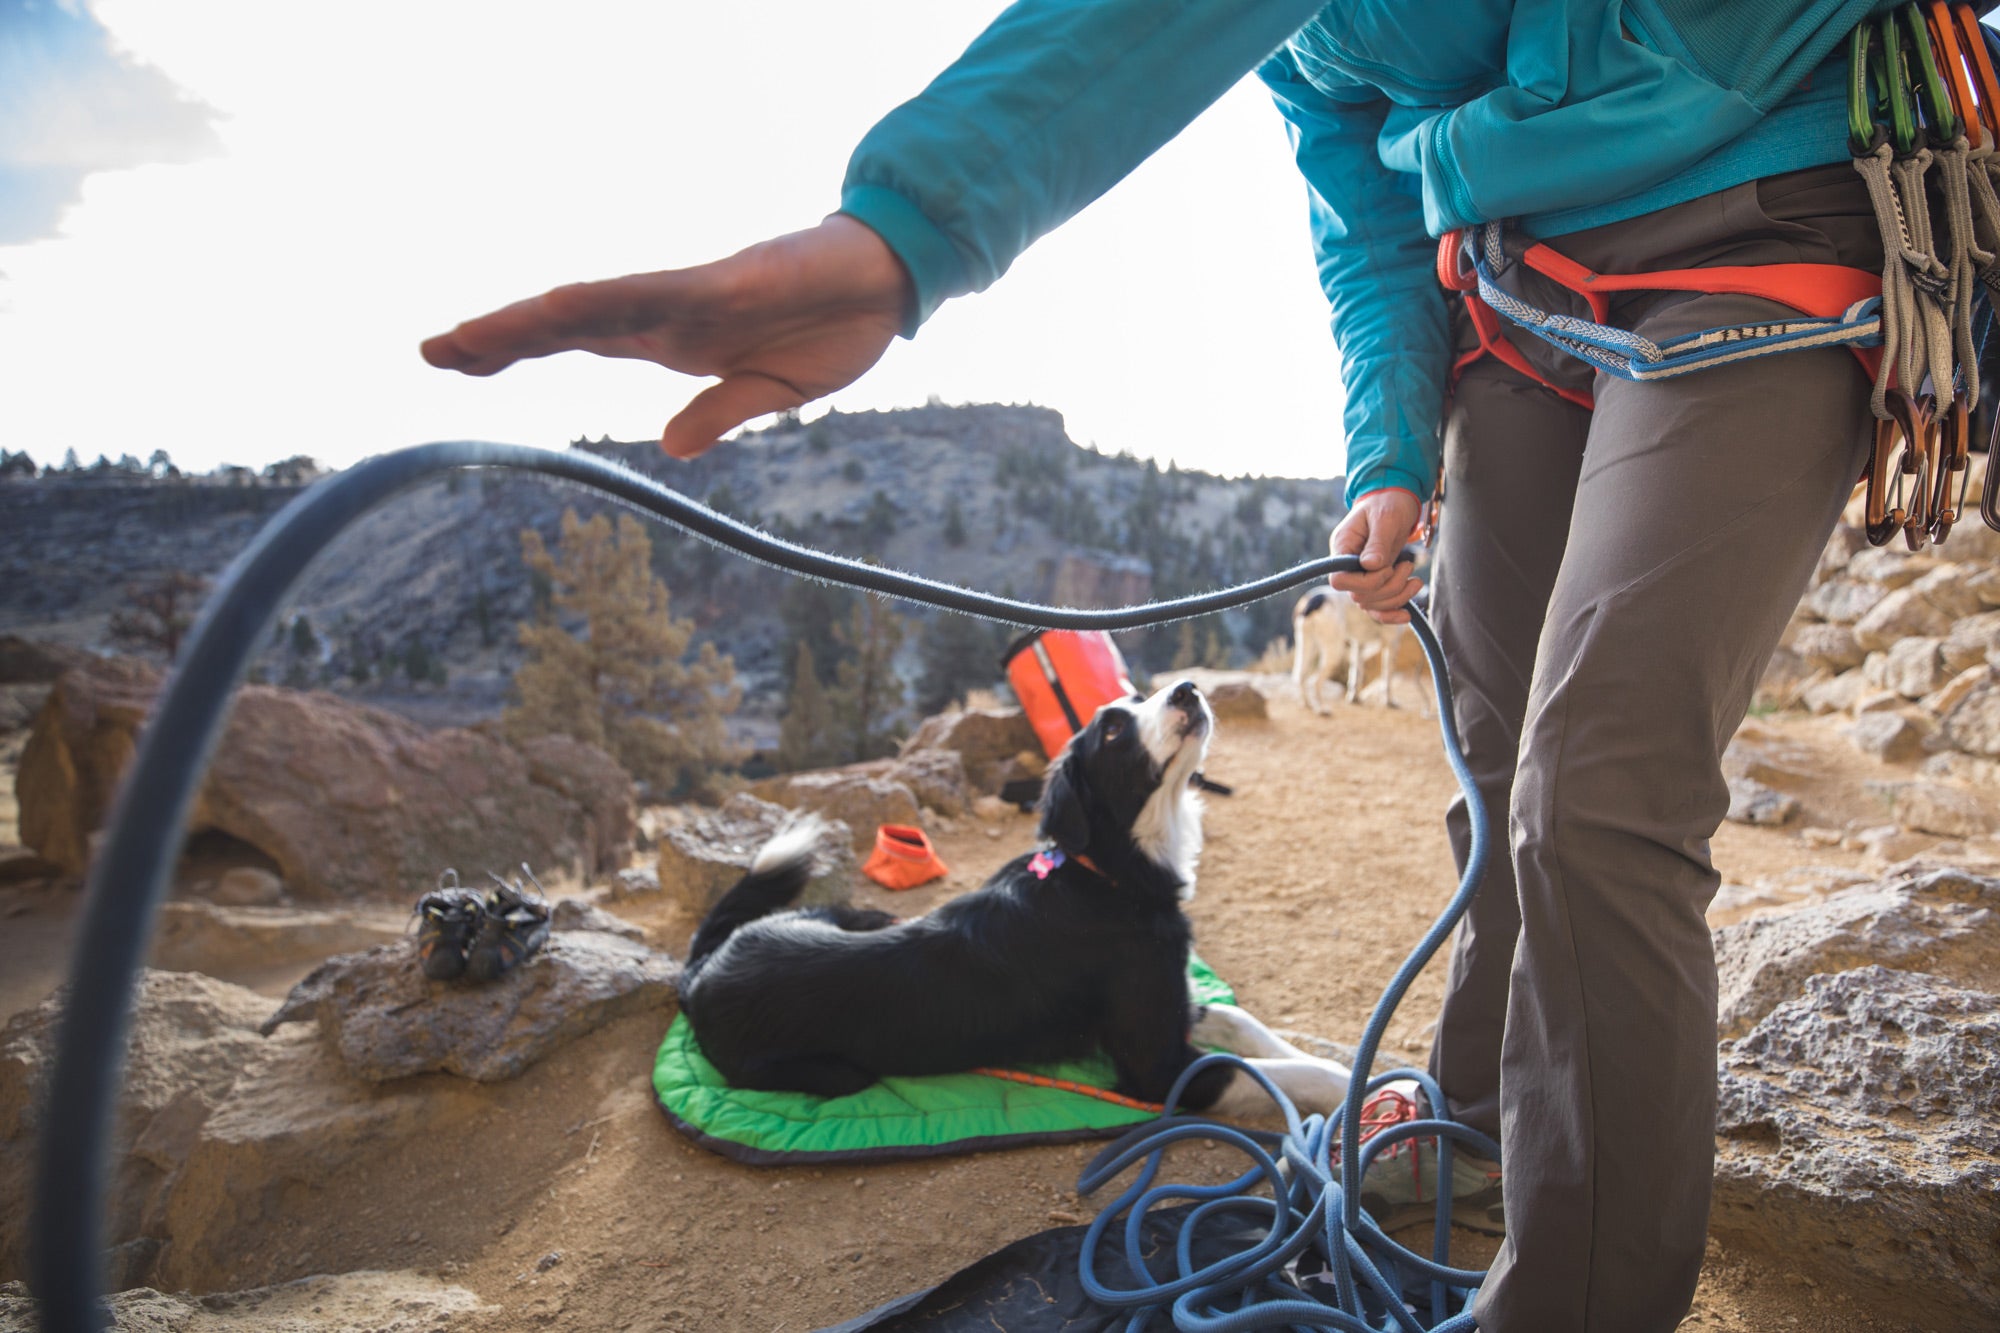 Woman gets climbing rope ready while dog looks on.